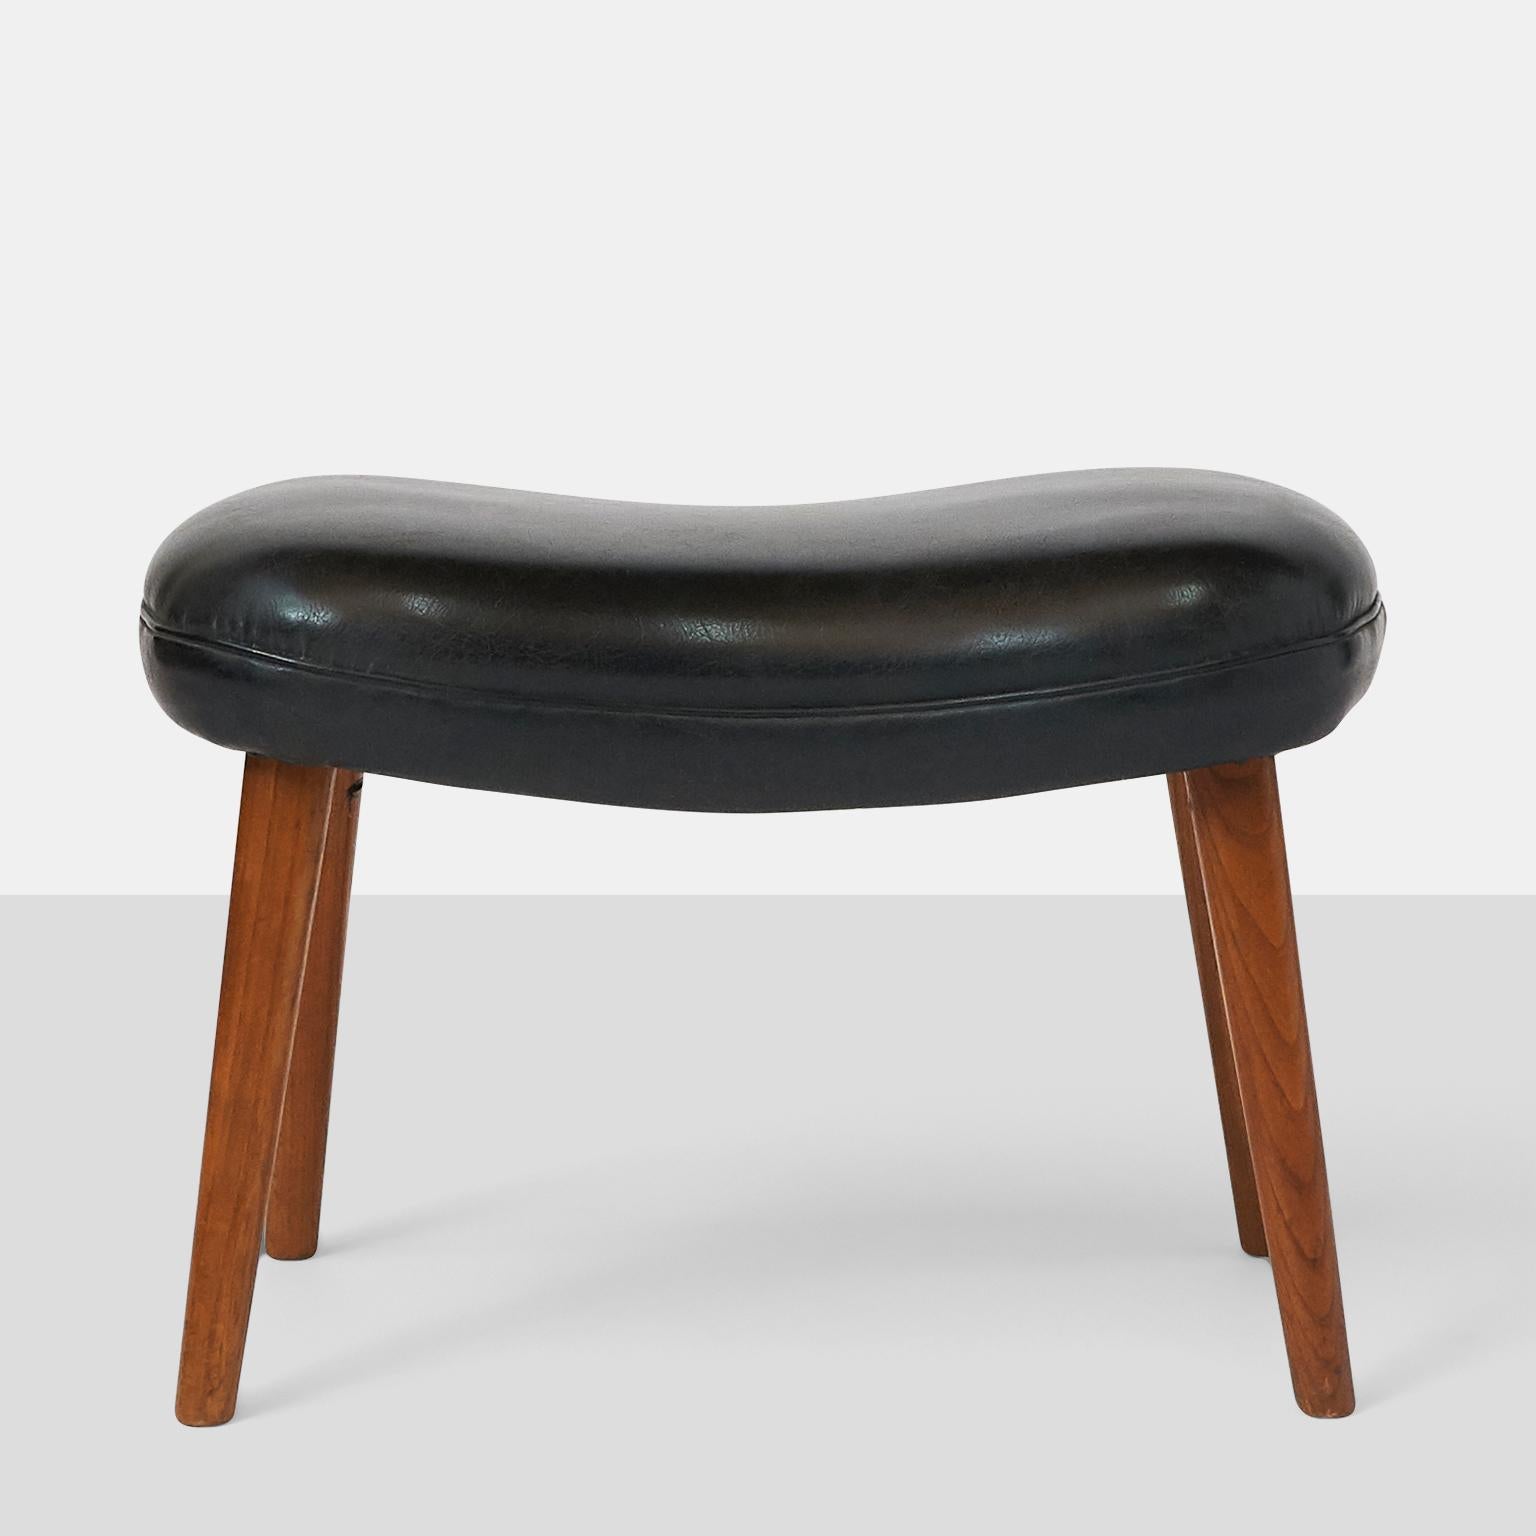 A rectangular shaped foot stool with black leather cushion seat and 4 tapered teak legs.